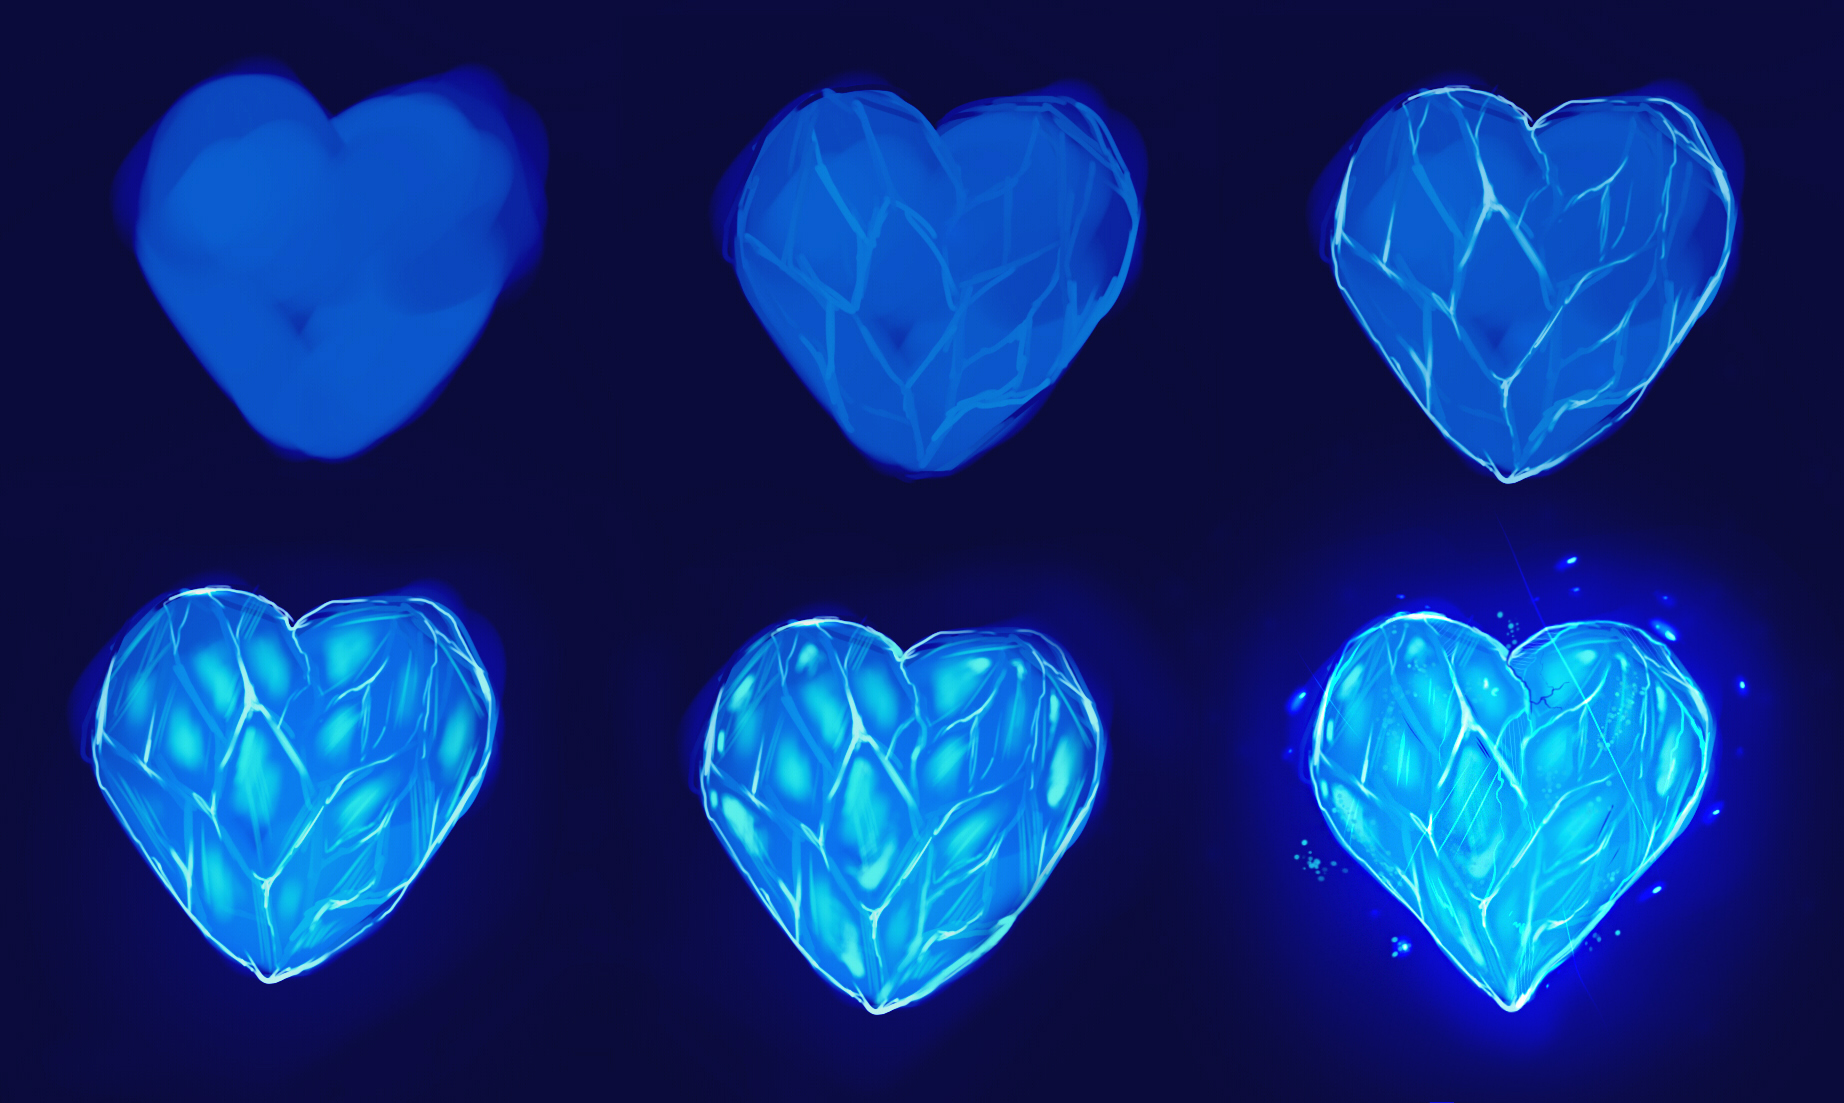 frozen heart step by step by ryky on DeviantArt